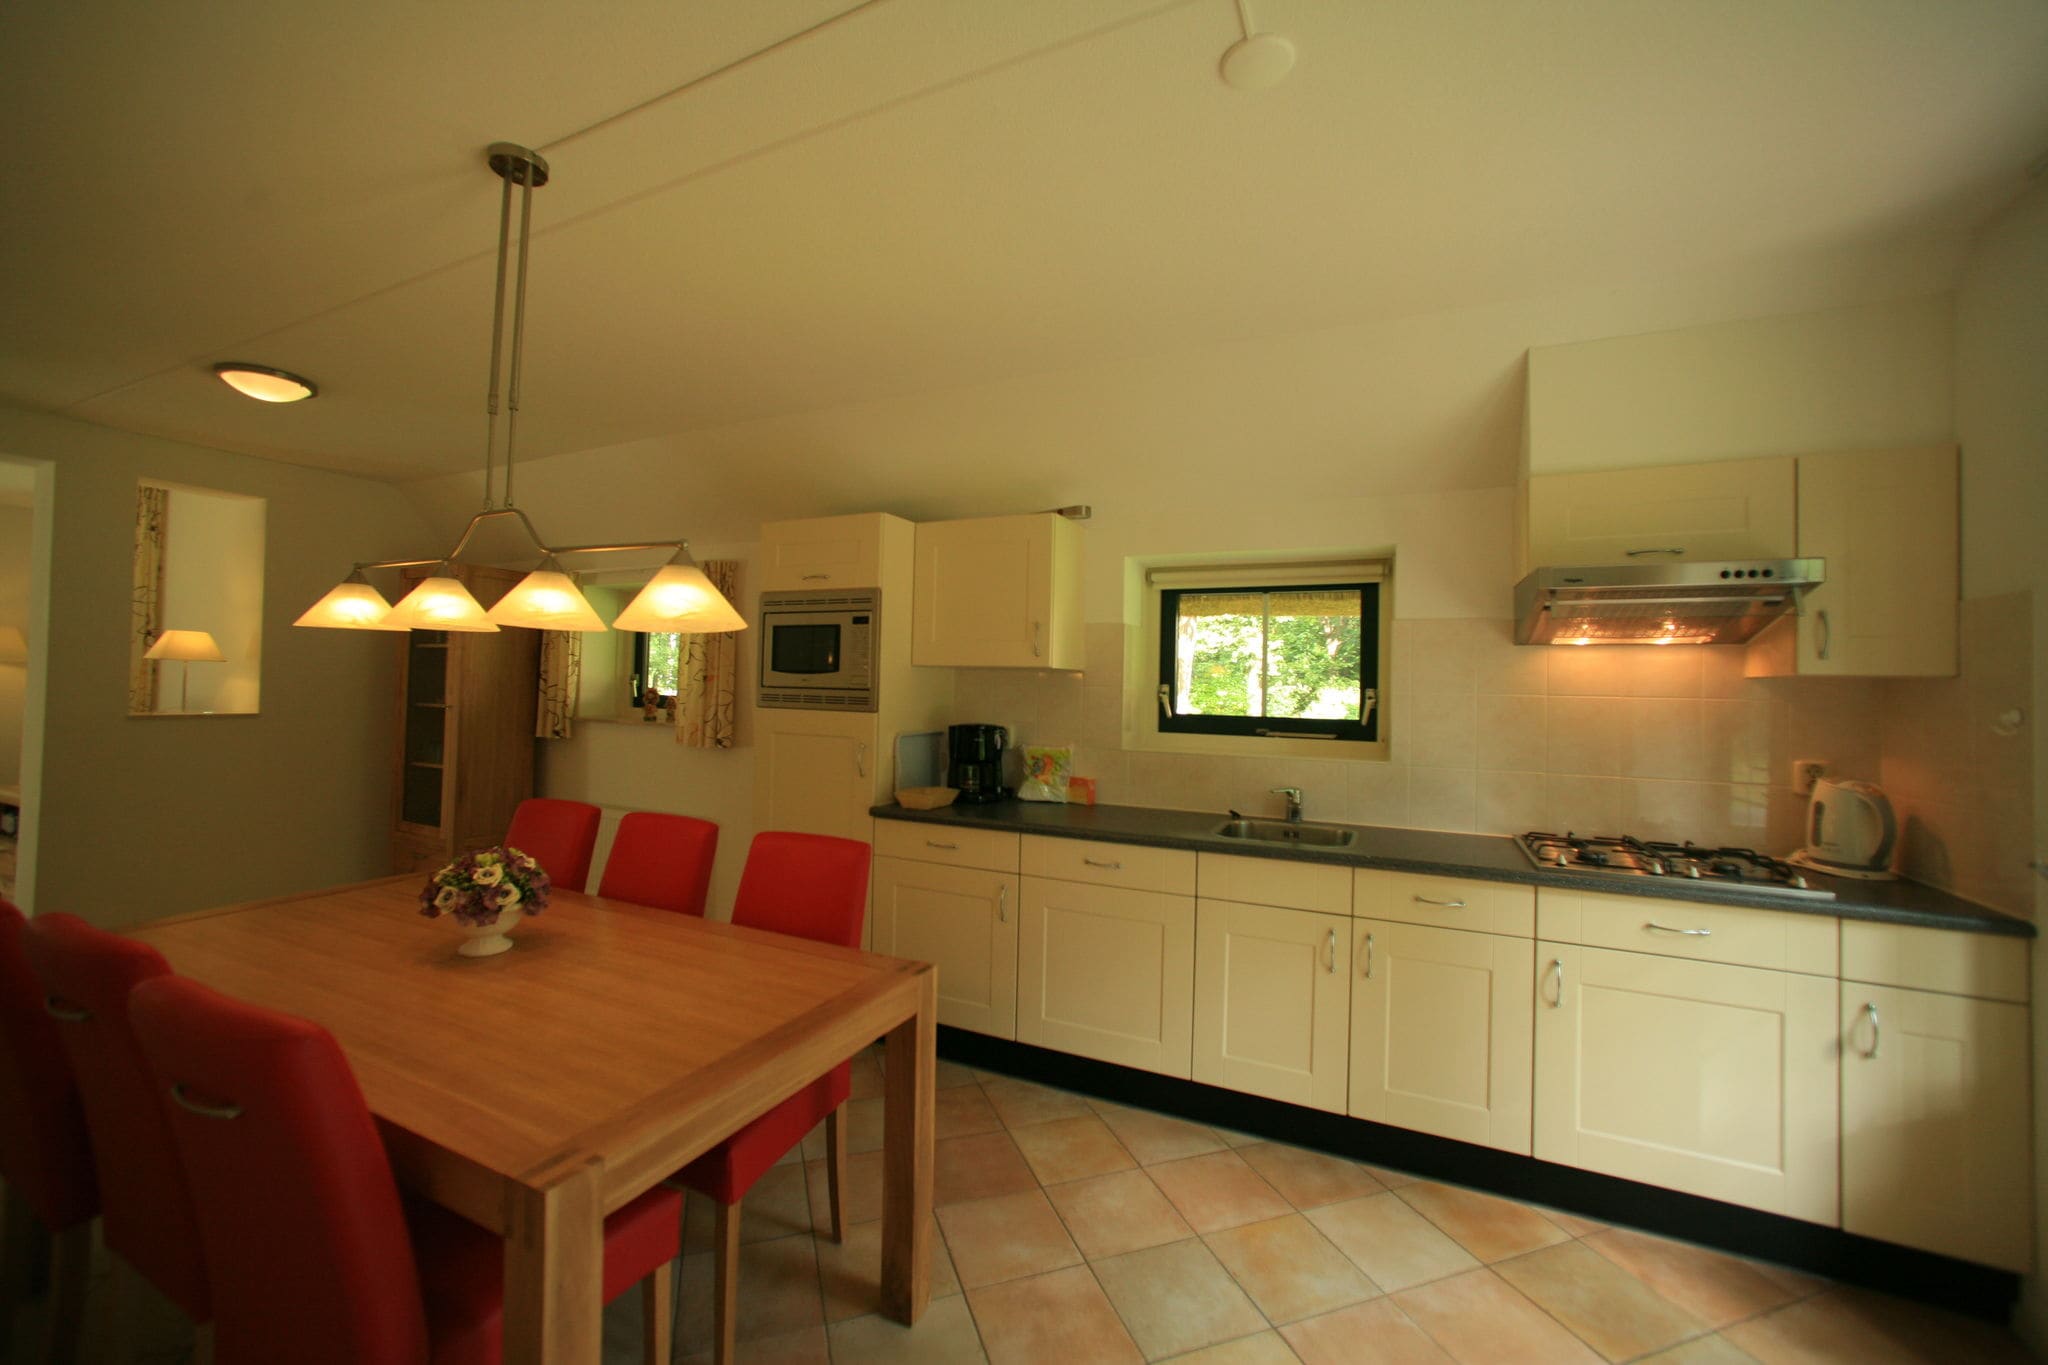 Detached holiday home with dishwasher, in a nature reserve